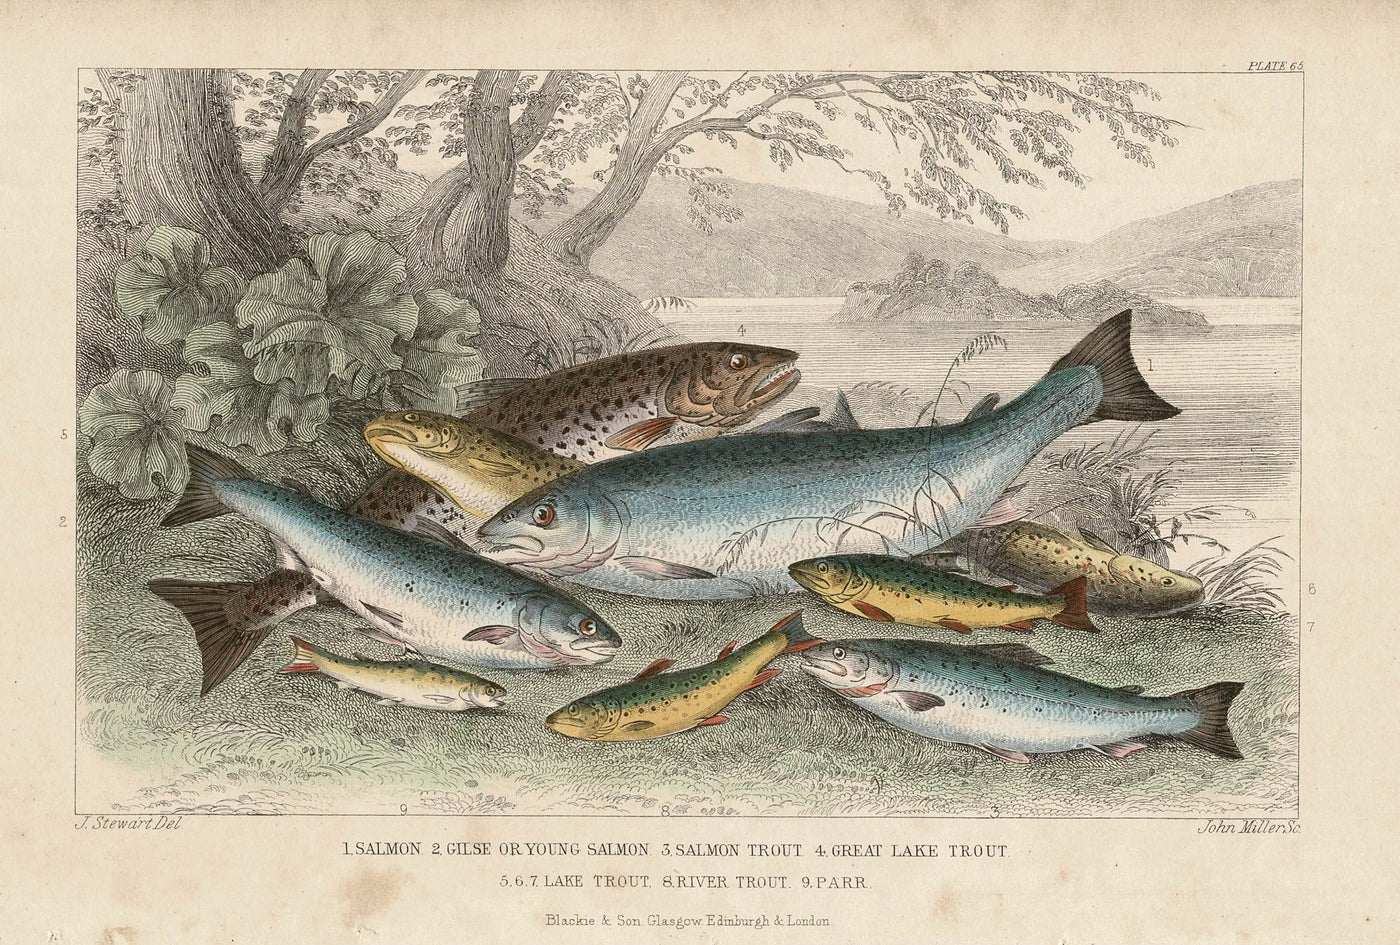 Salmon and Trout, antique print published 1862